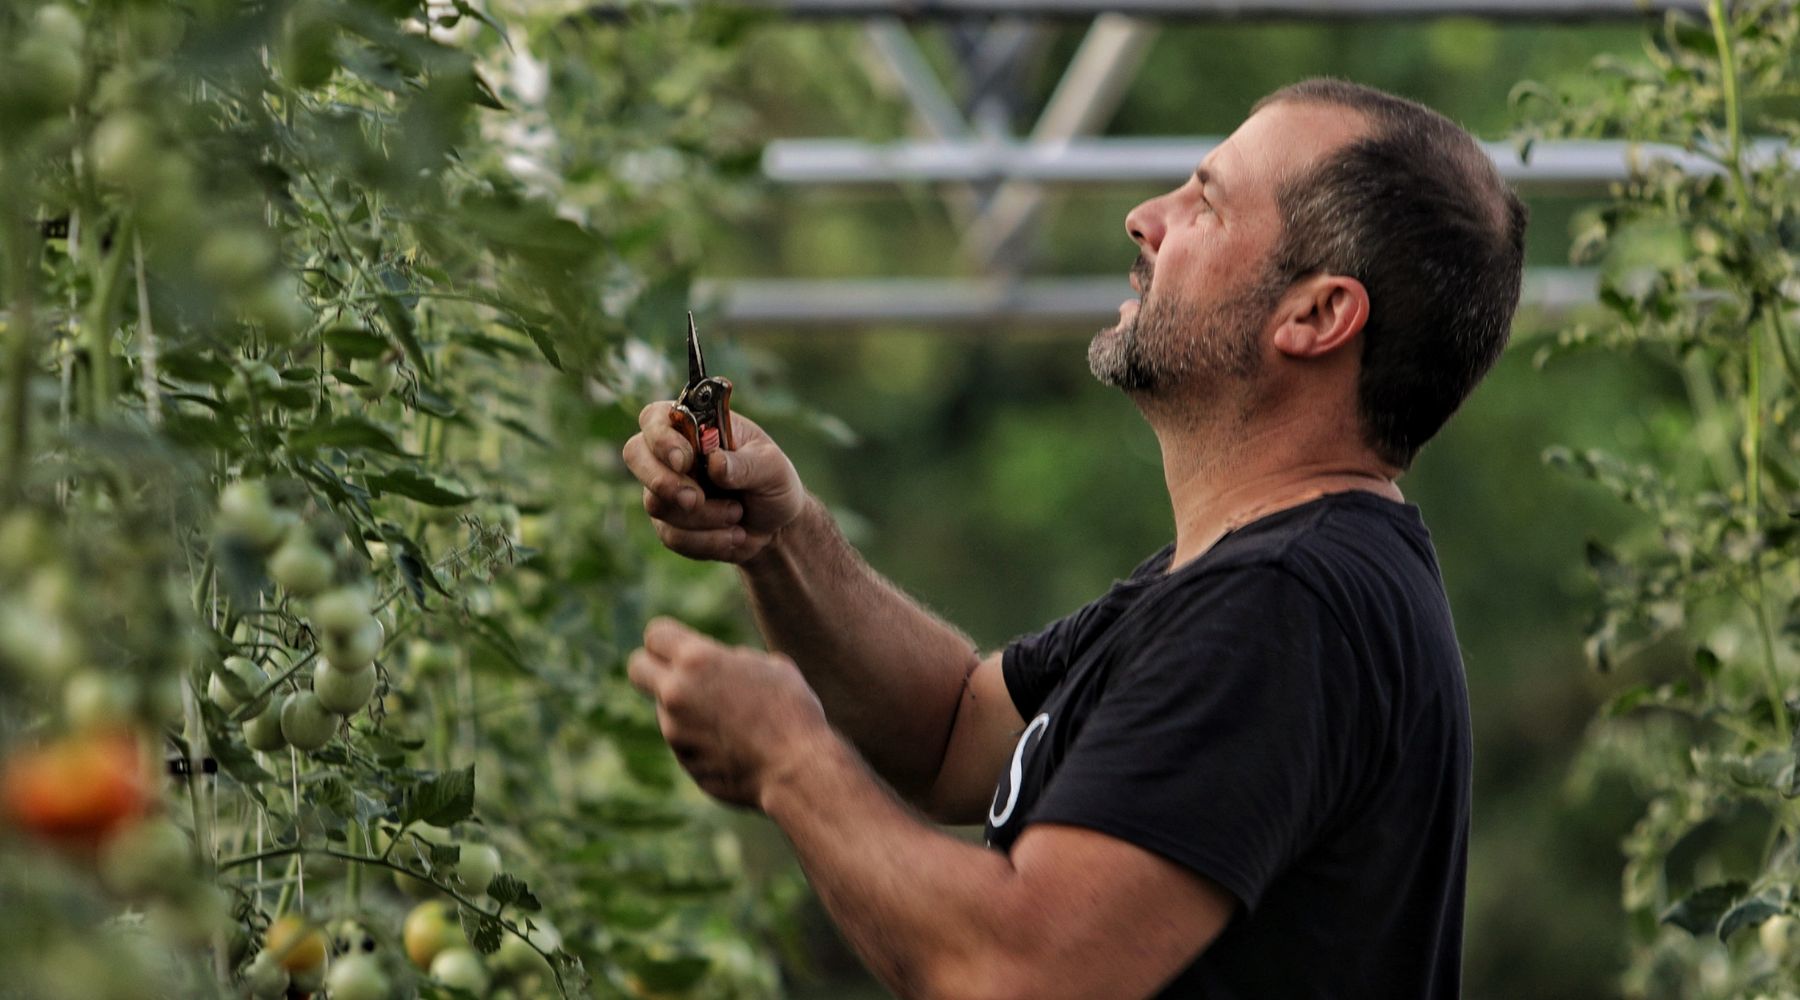 Tomatoes growing on trellised vines being pruned by a man in a black shirt. 